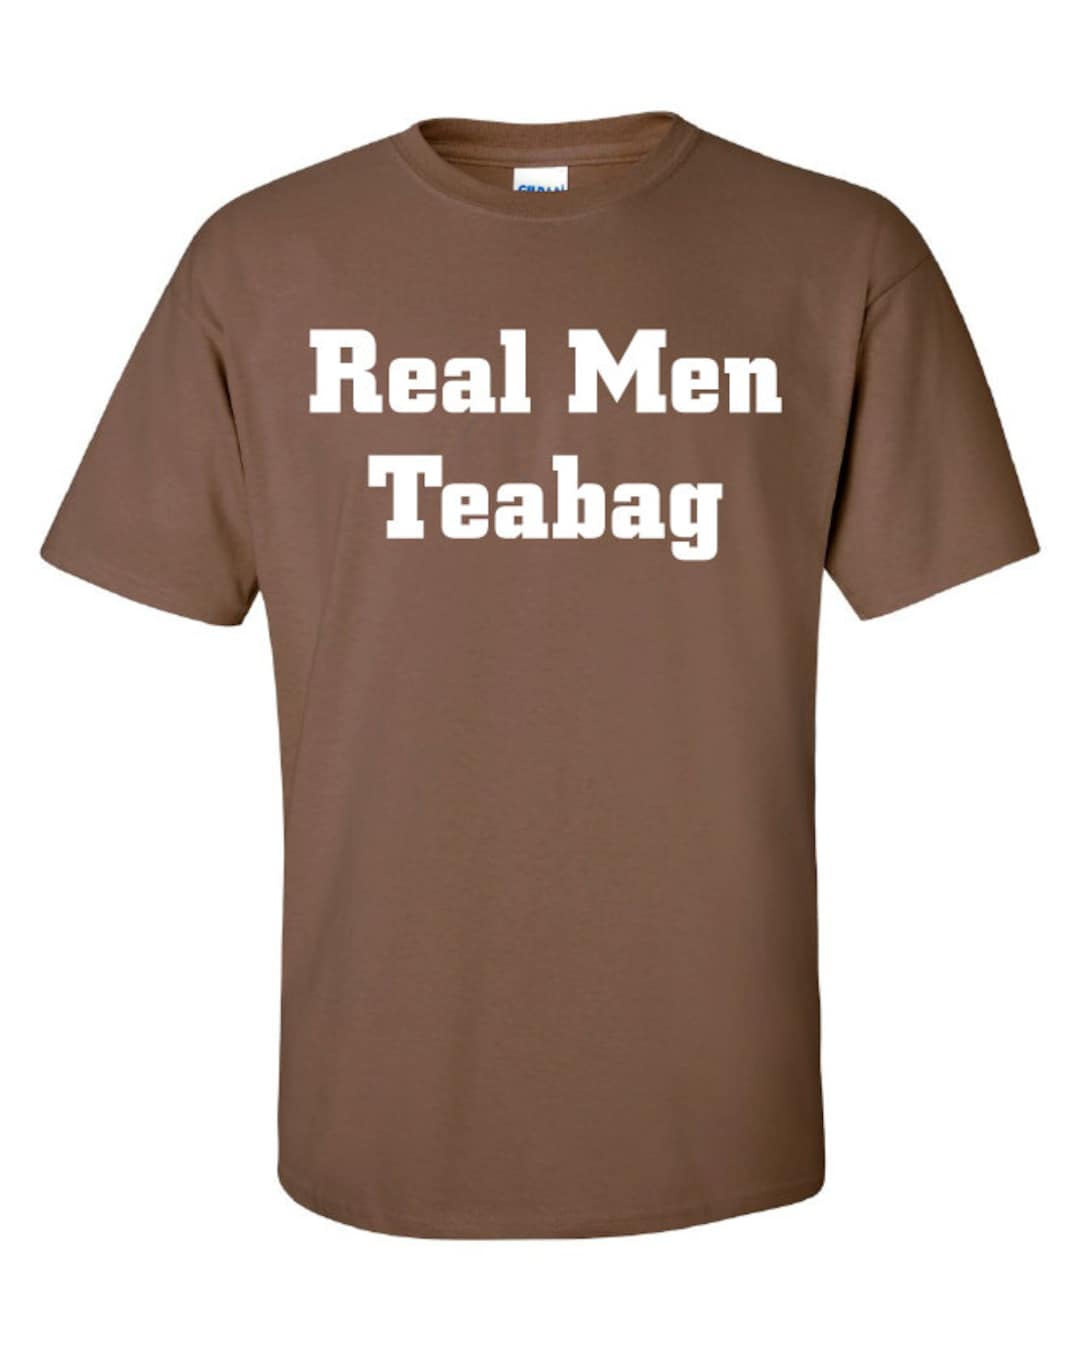 Best of Guys teabagging each other